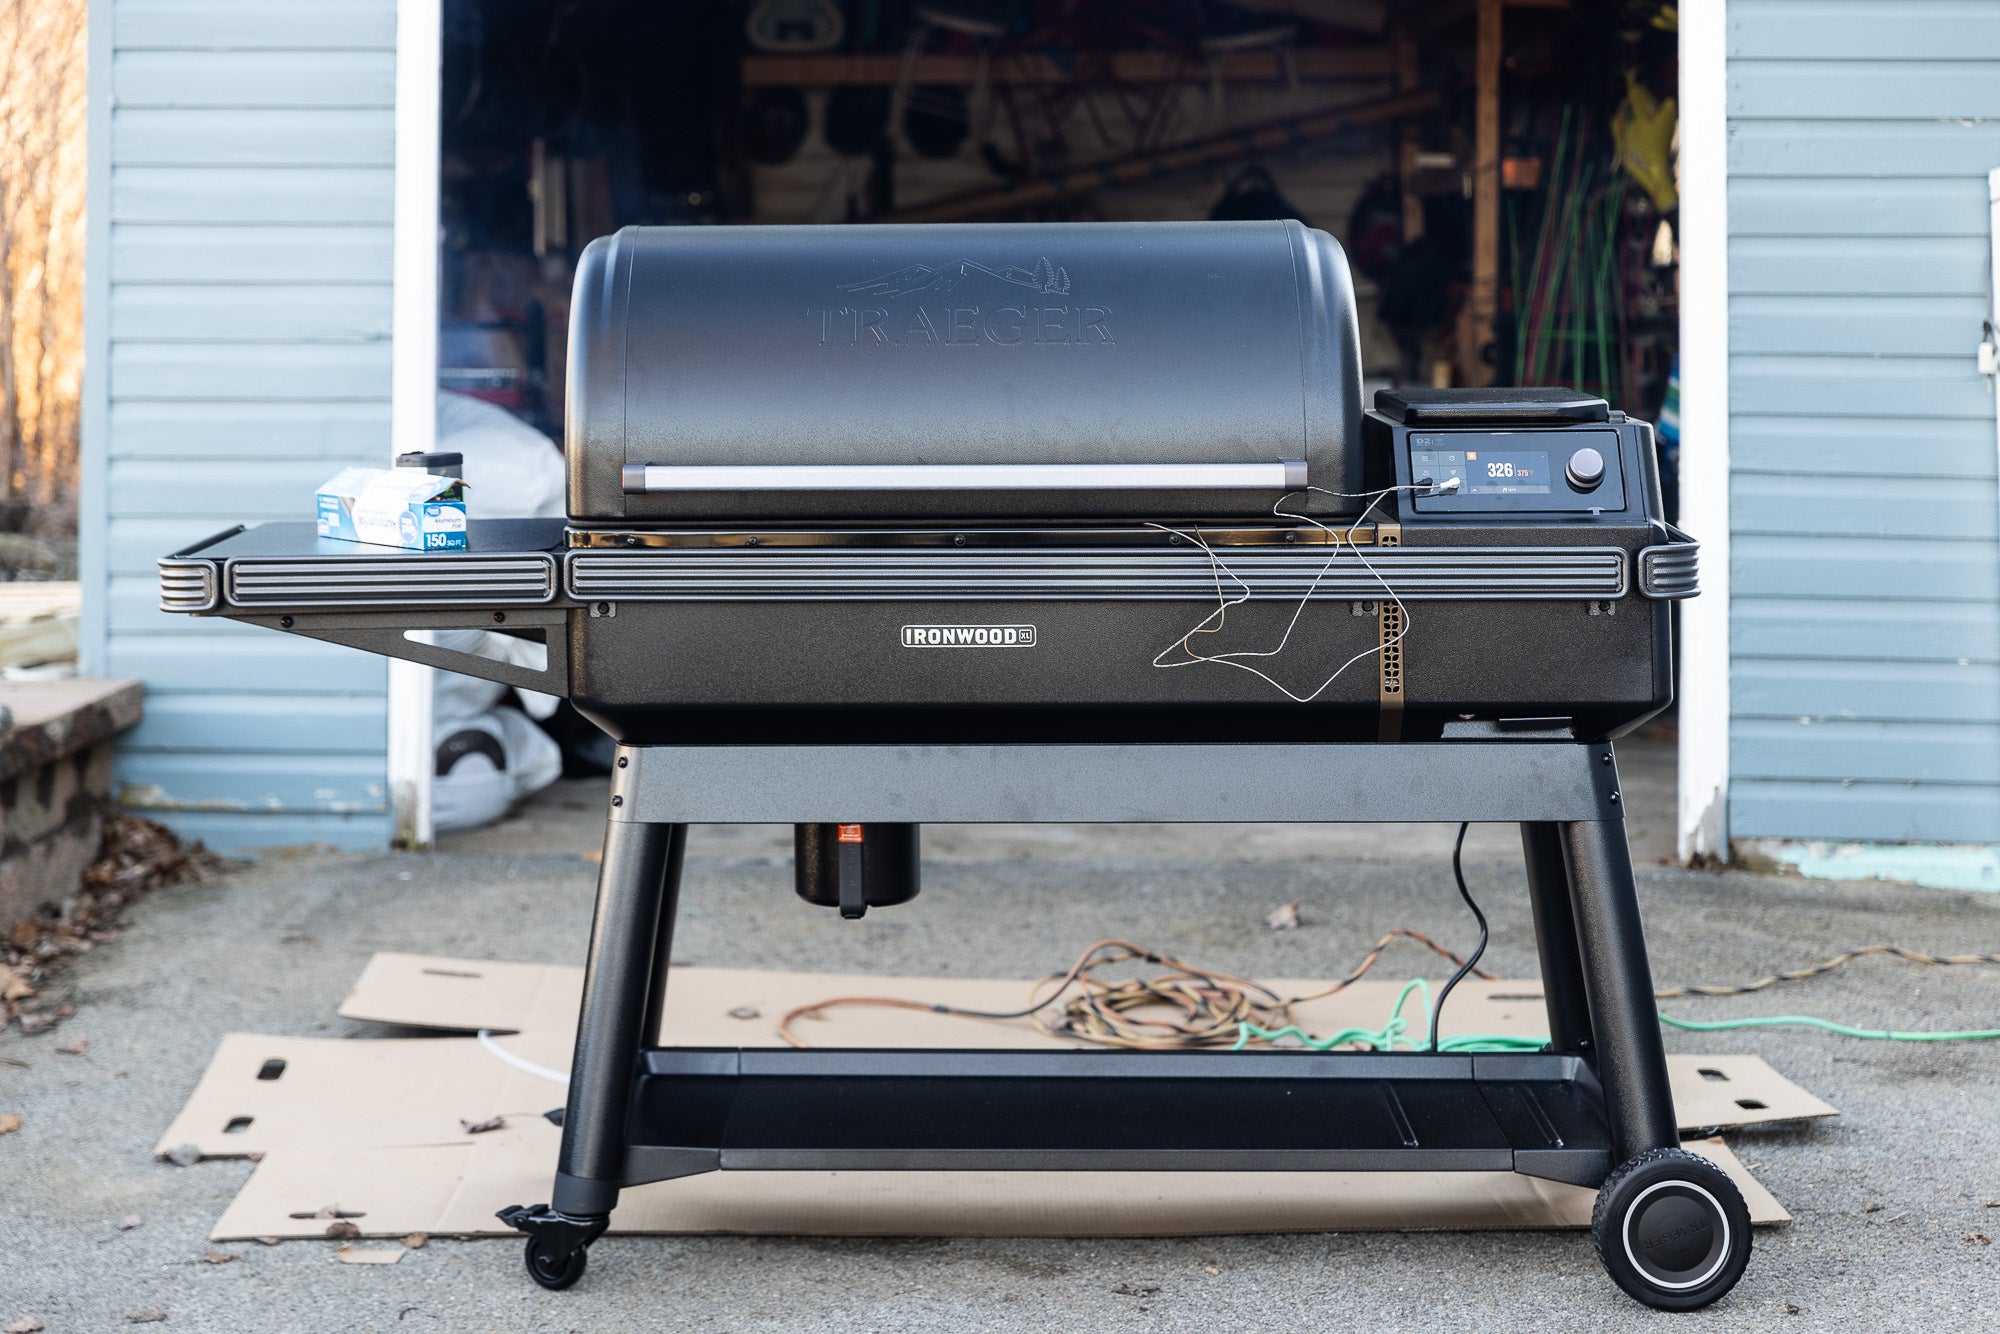 Before Memorial Day, purchase a Traeger Pellet Grill for just $389